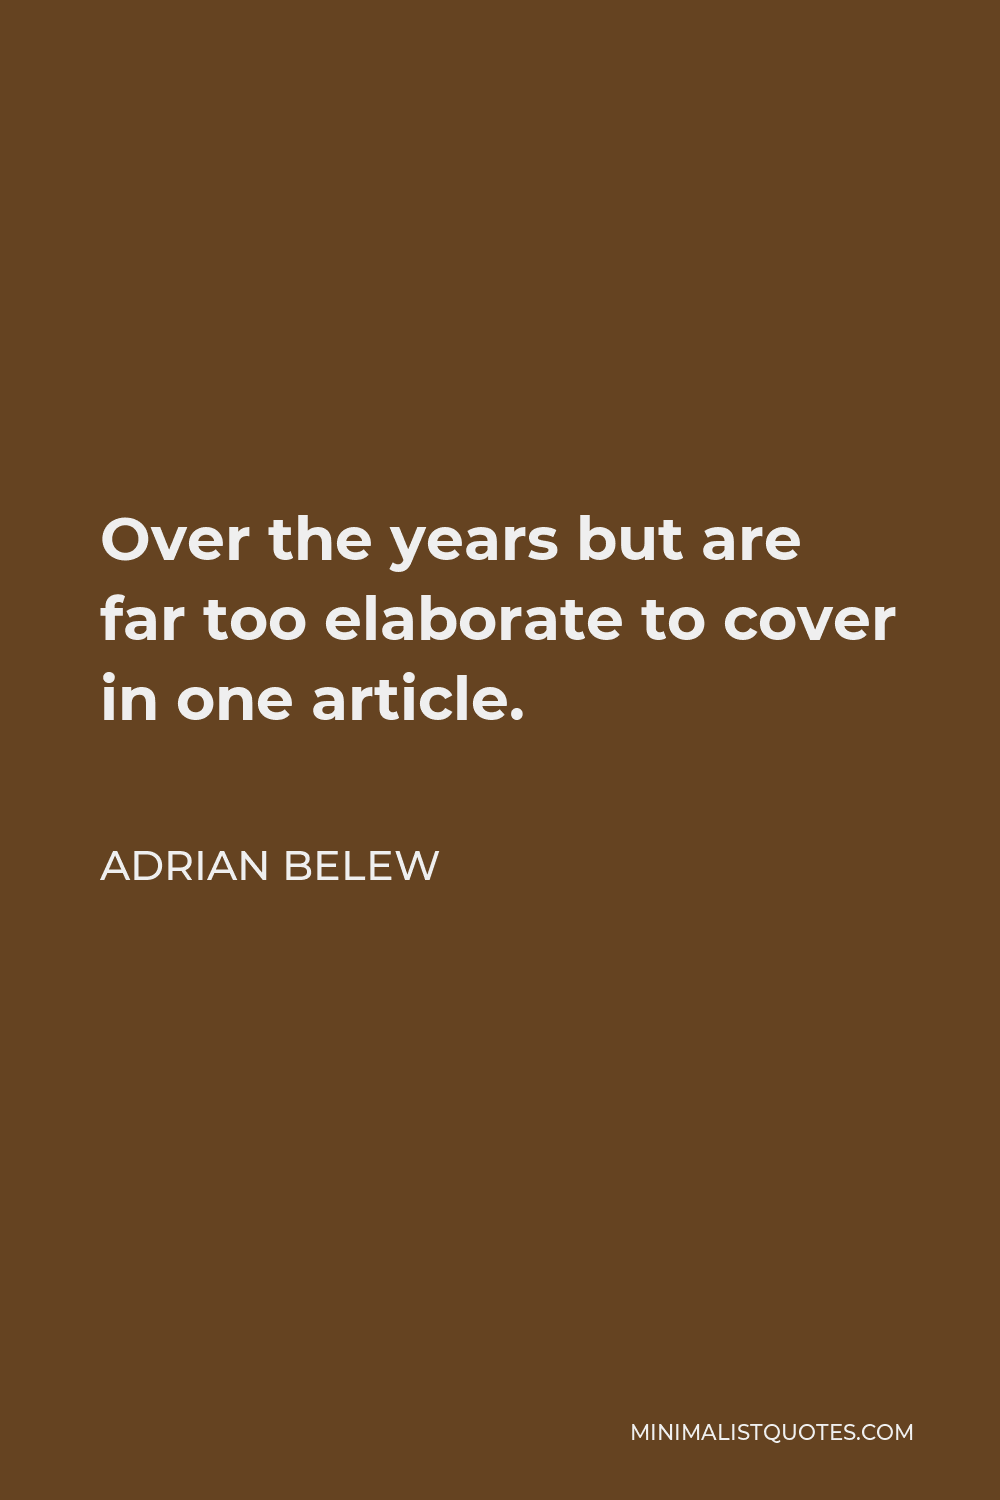 Adrian Belew Quote - Over the years but are far too elaborate to cover in one article.